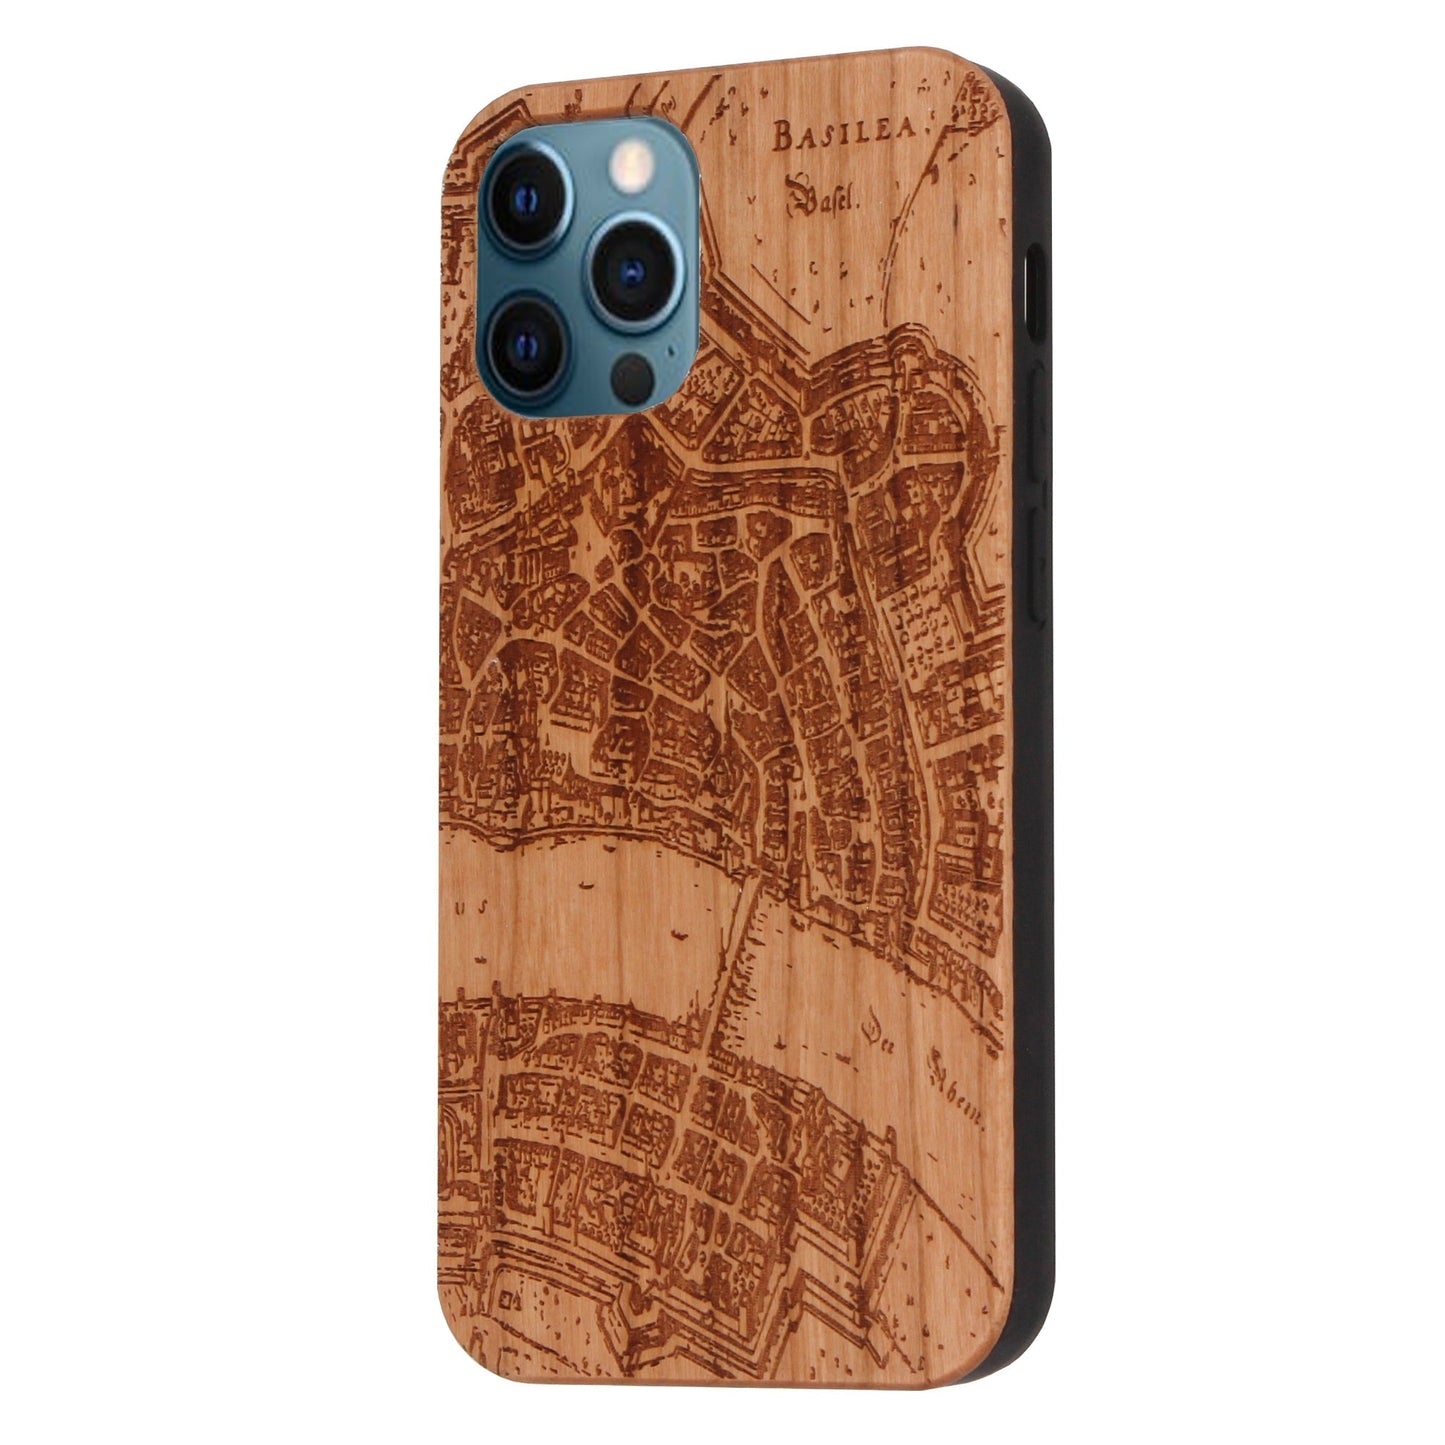 Basel Merian Eden case made of cherry wood for iPhone 12 Pro Max 